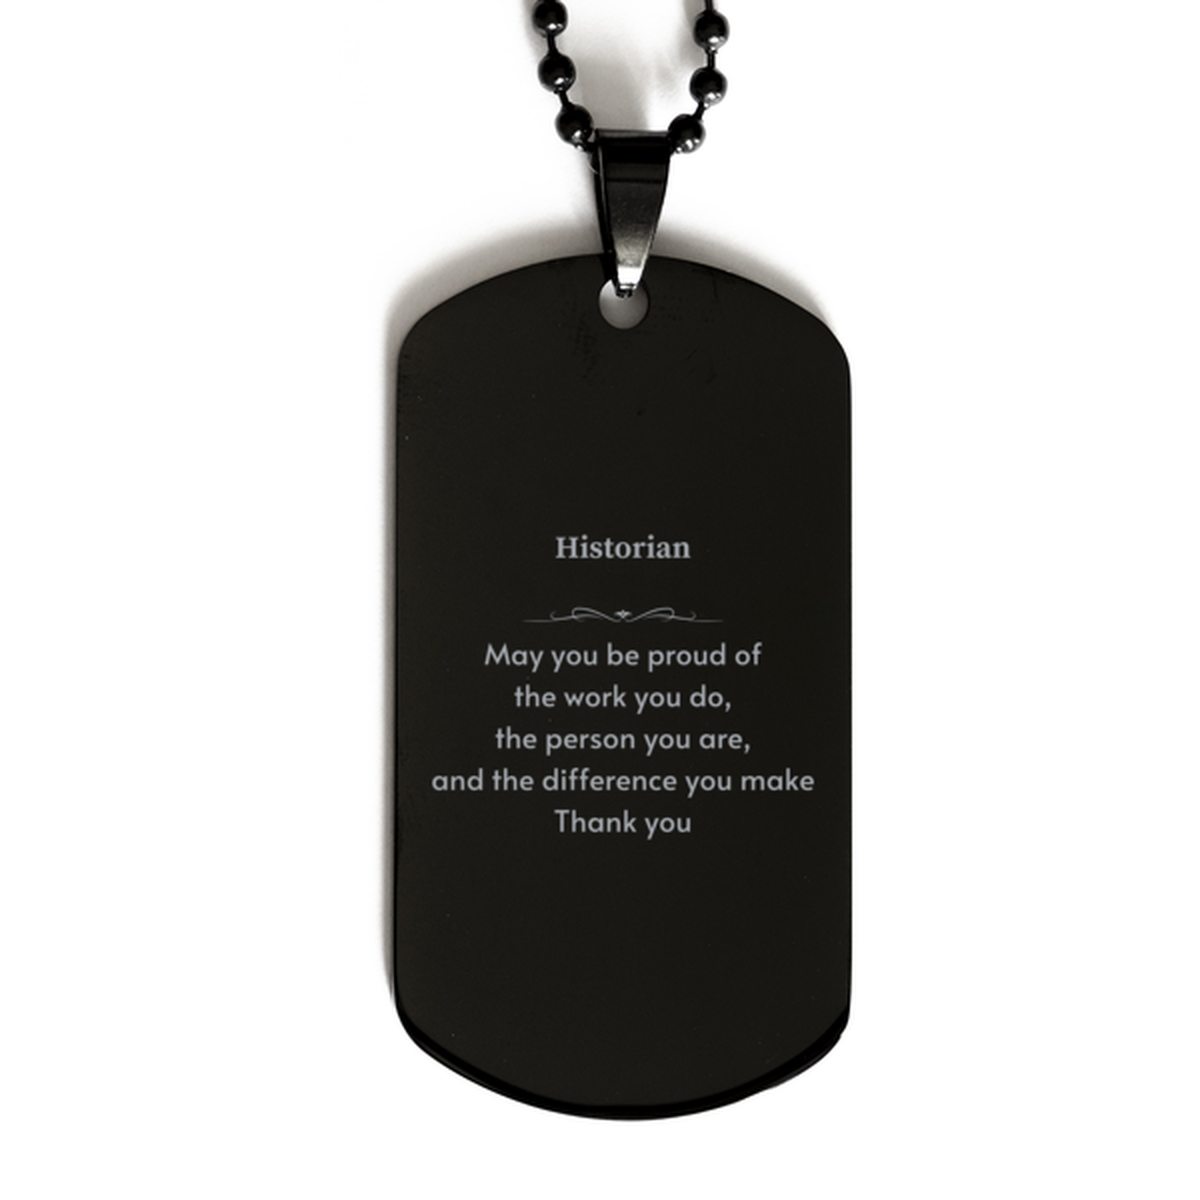 Heartwarming Black Dog Tag Retirement Coworkers Gifts for Historian, Historian May You be proud of the work you do, the person you are Gifts for Boss Men Women Friends